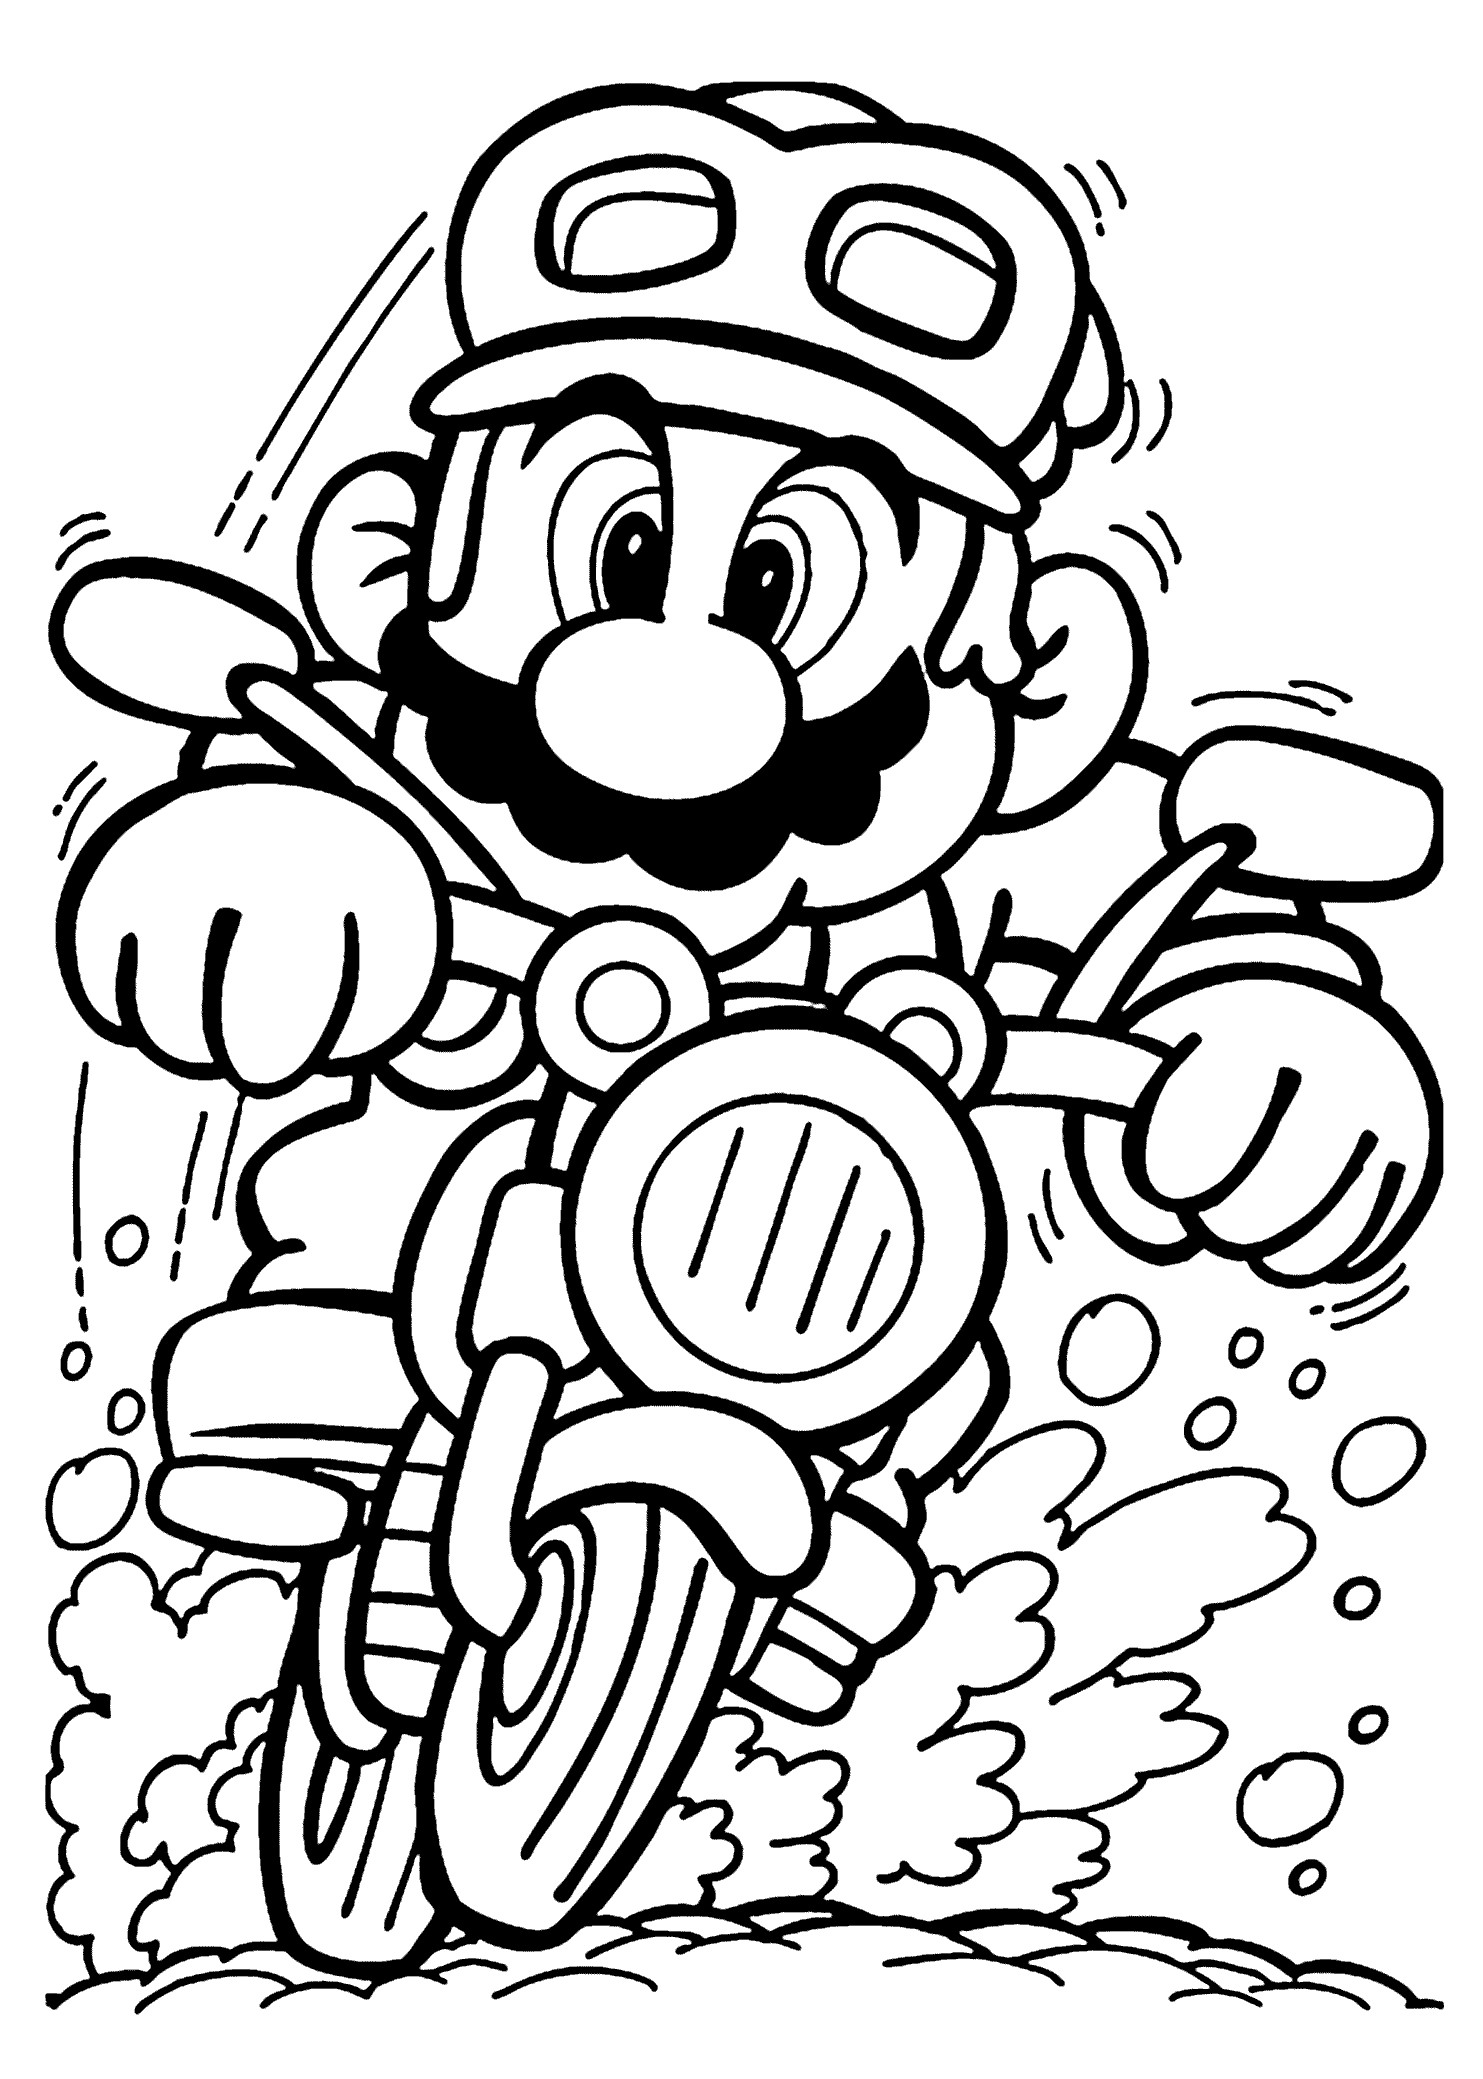 Adult Coloring Books For Boys
 Mario on motorcycle coloring pages for kids printable free Coloring pages Pinterest